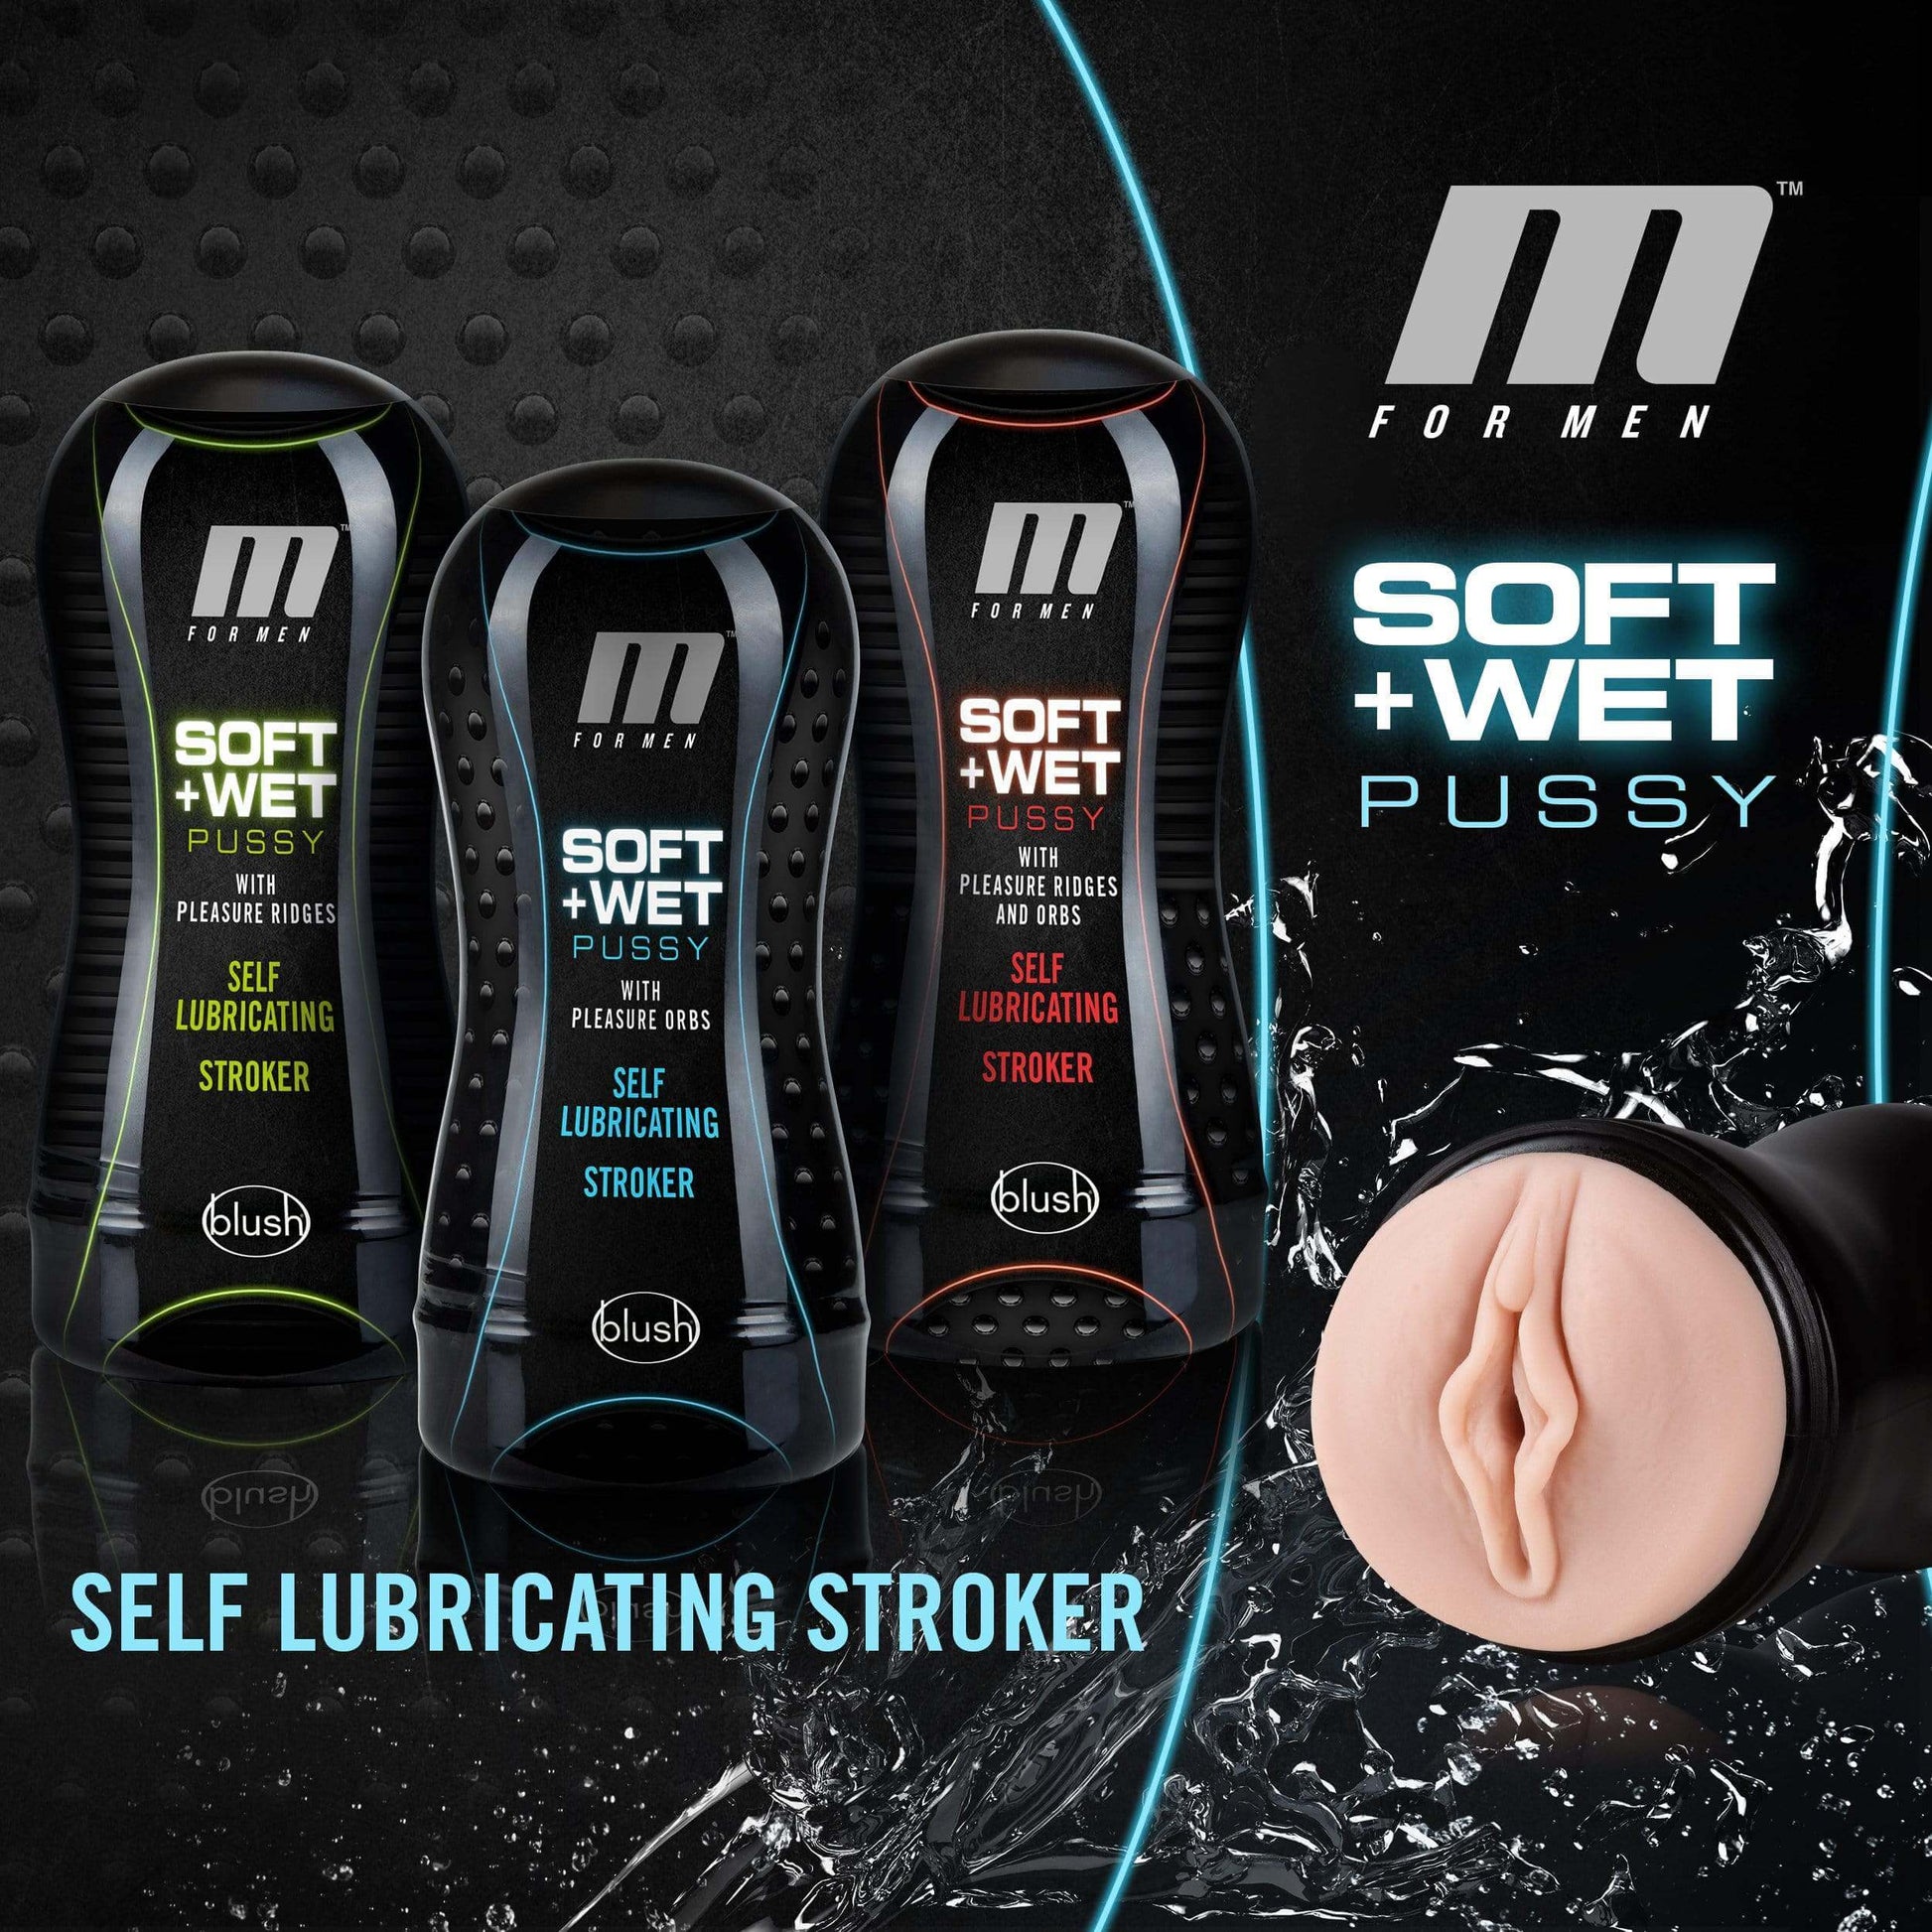 M for Men - Soft and Wet - Pussy with Pleasure Ridges - Self Lubricating Stroker Cup - Vanilla - Thorn & Feather Sex Toy Canada